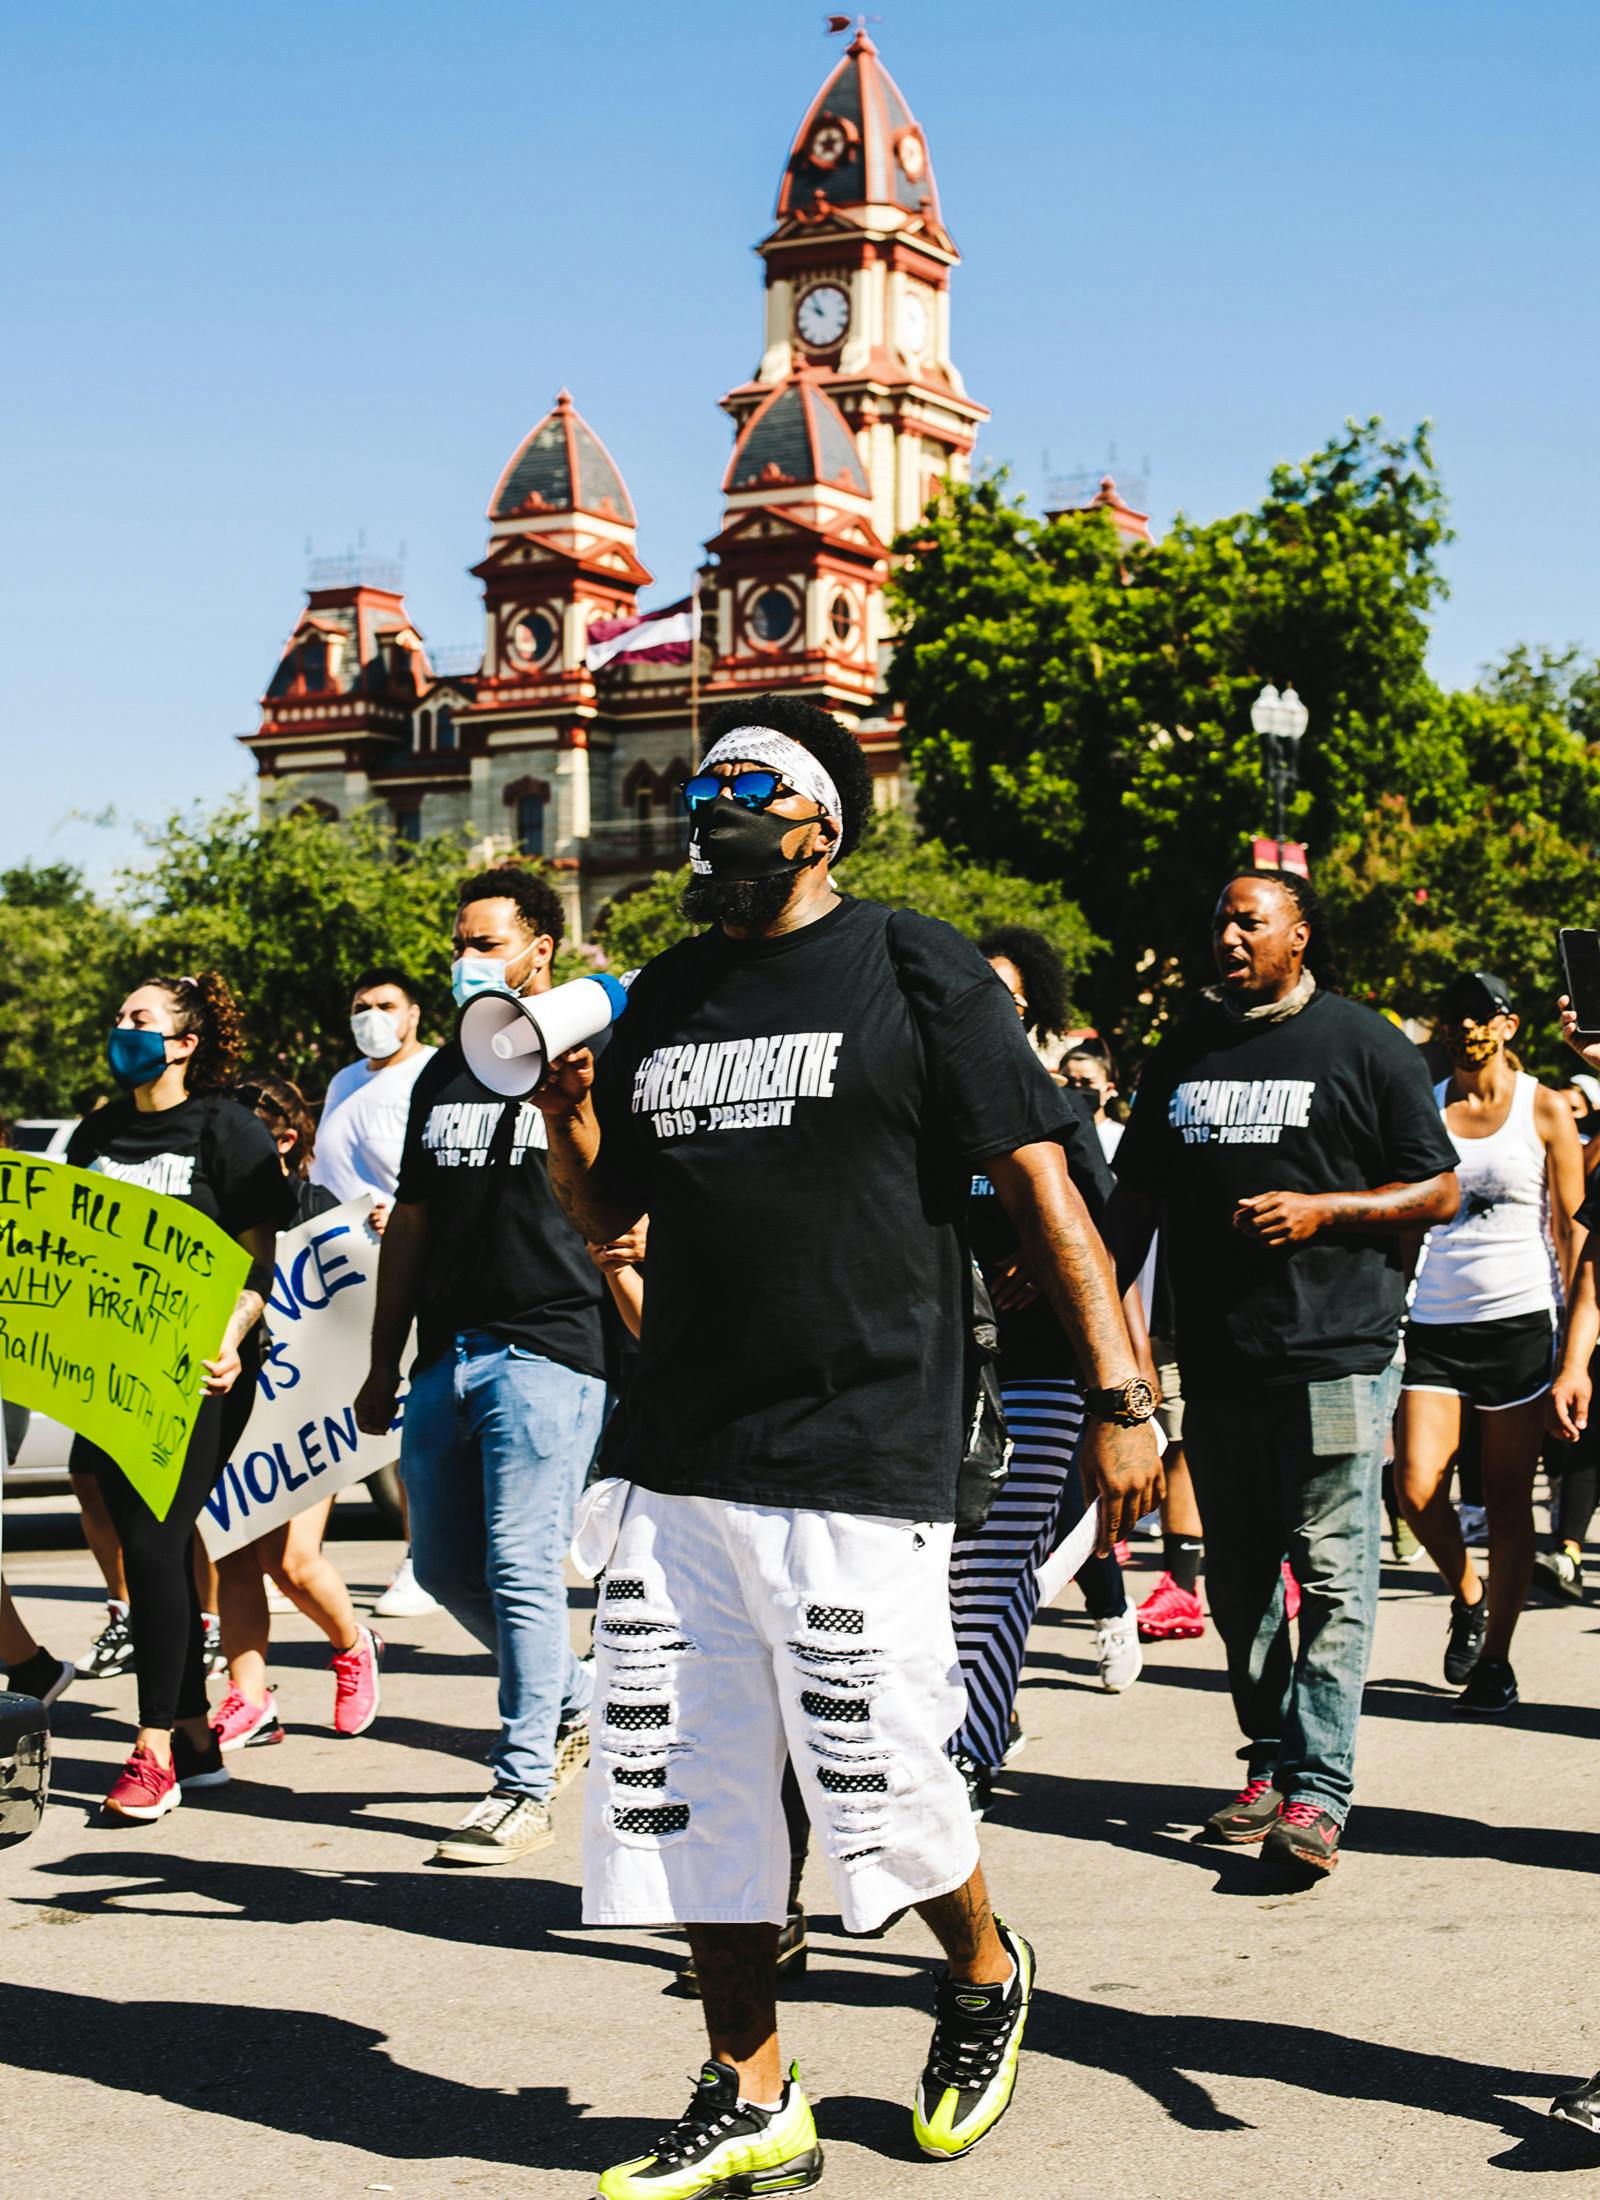 Joe Rollins leads protesters in a chant near Lockhart’s historic courthouse building during a civil rights march celebrating the life of George Floyd on Saturday, June 13.